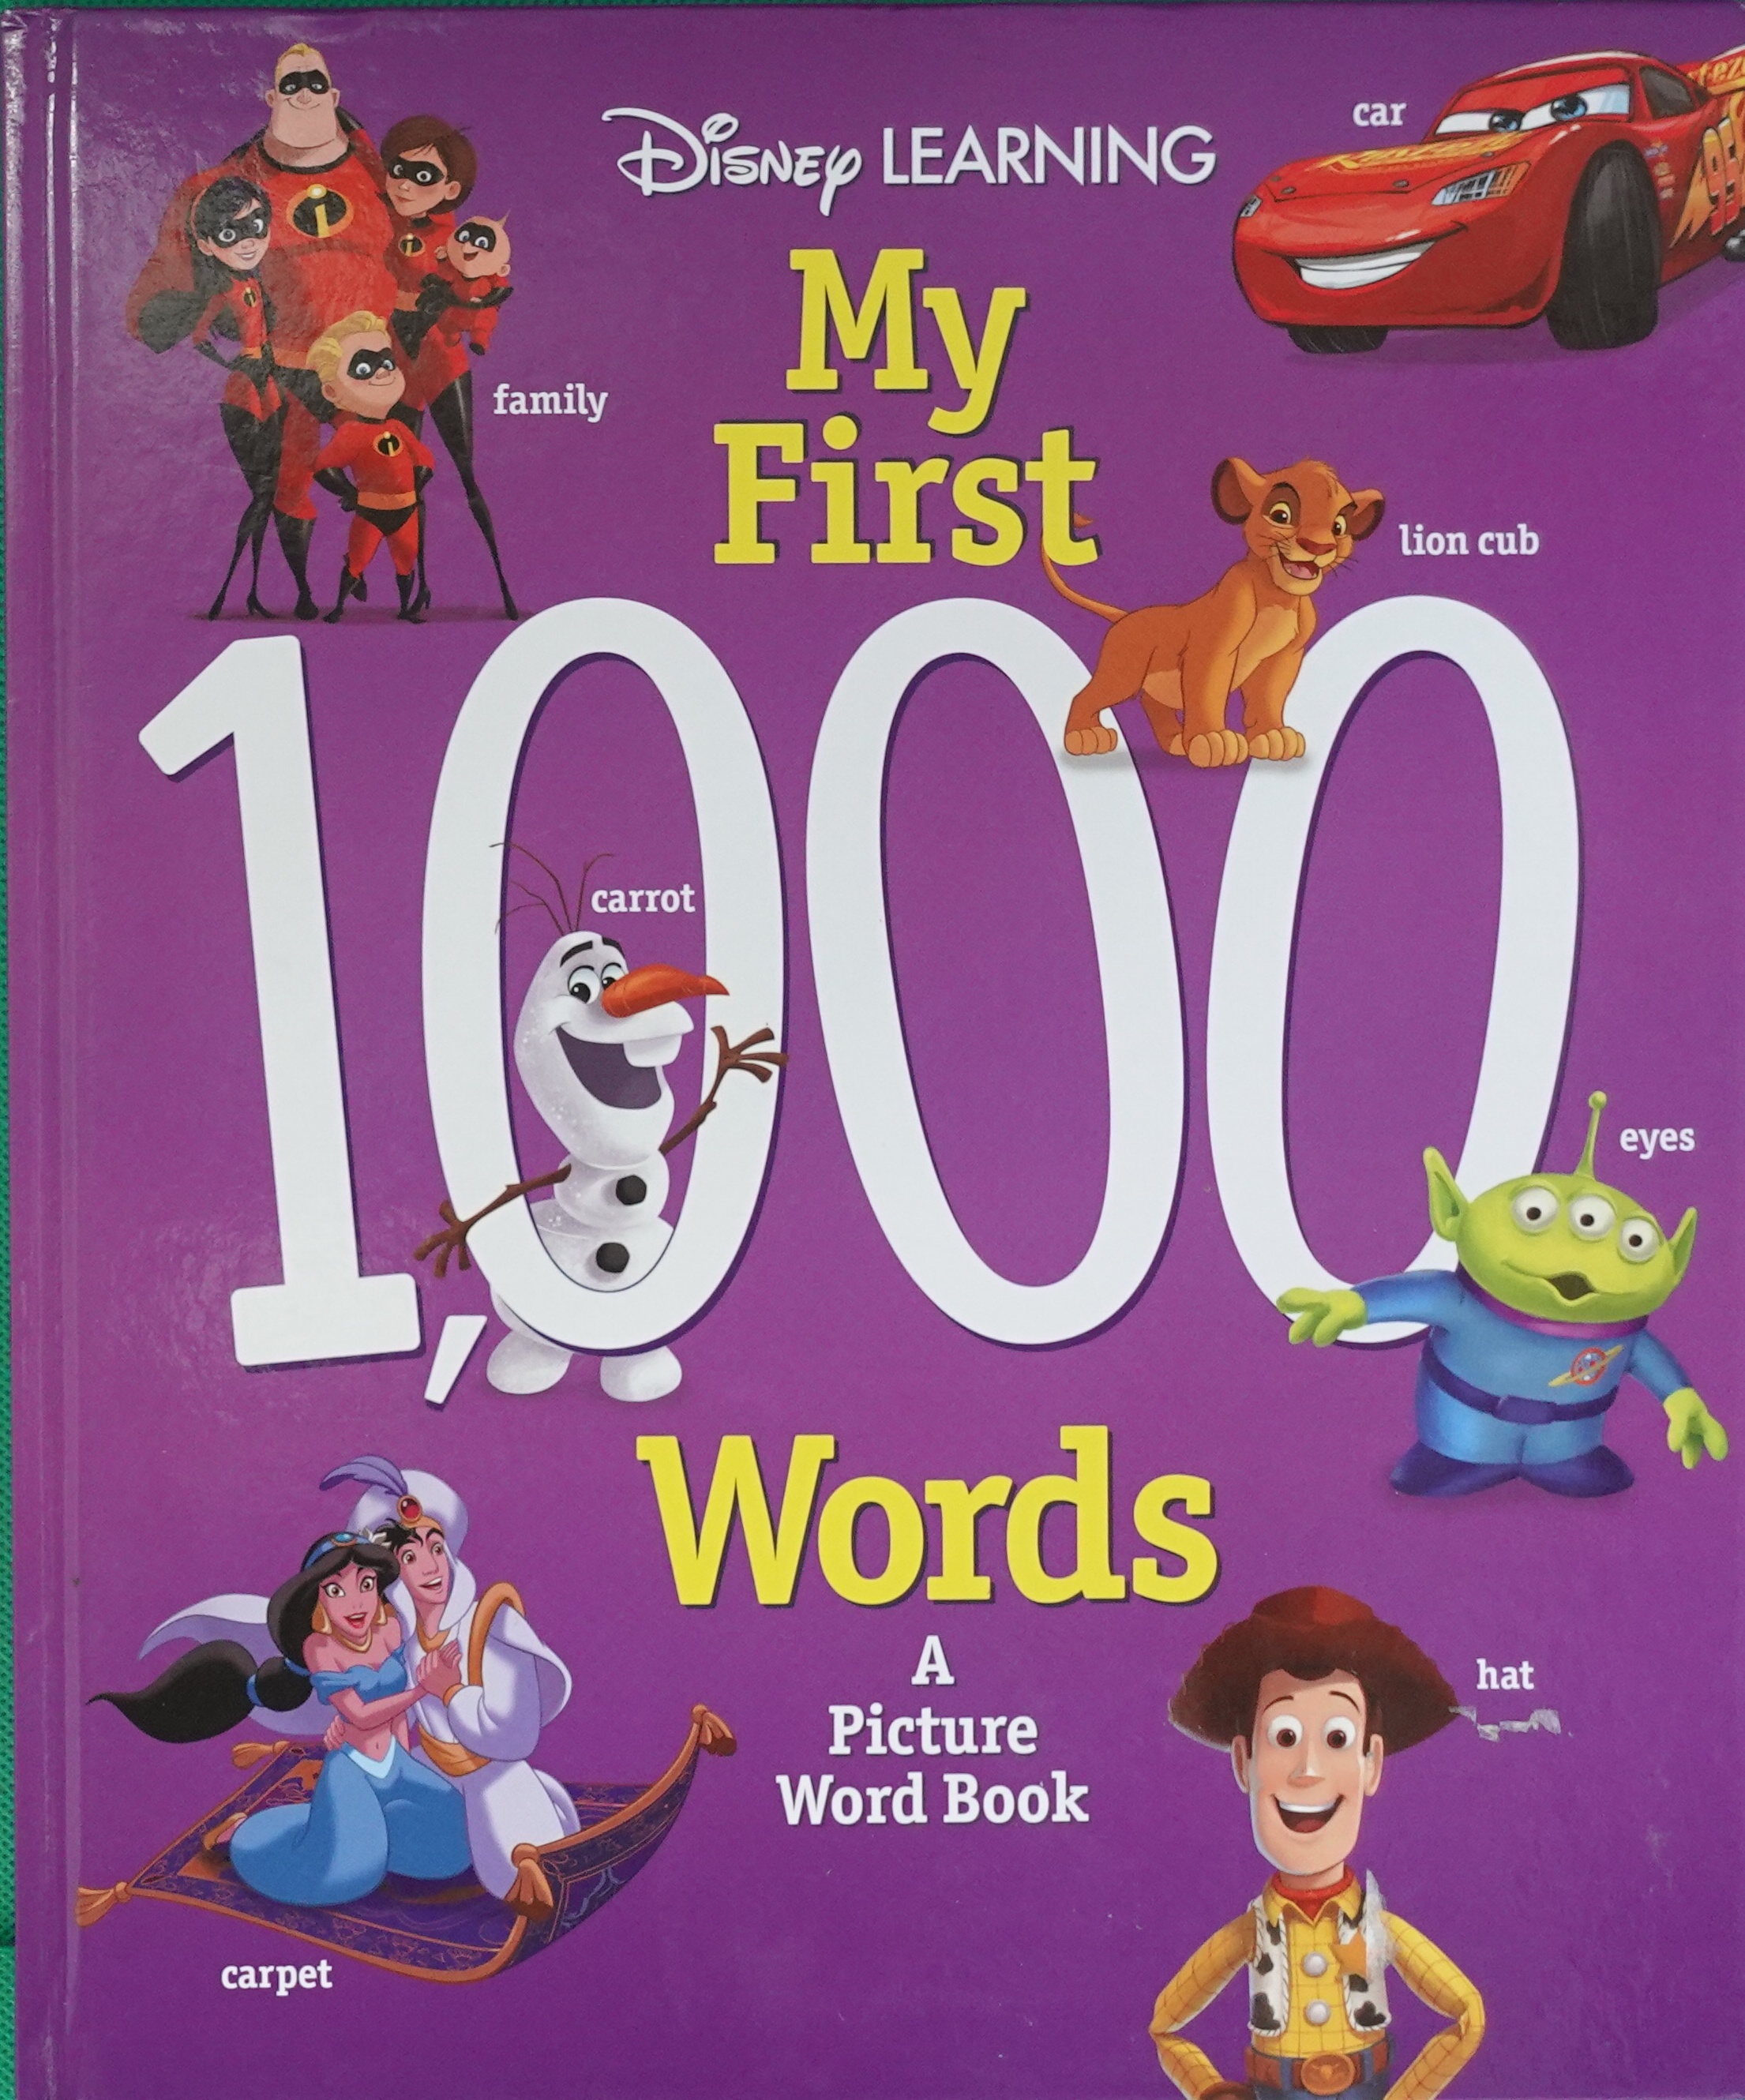 My first 1000 words a picture word book_童话和民间故事和神话_儿童